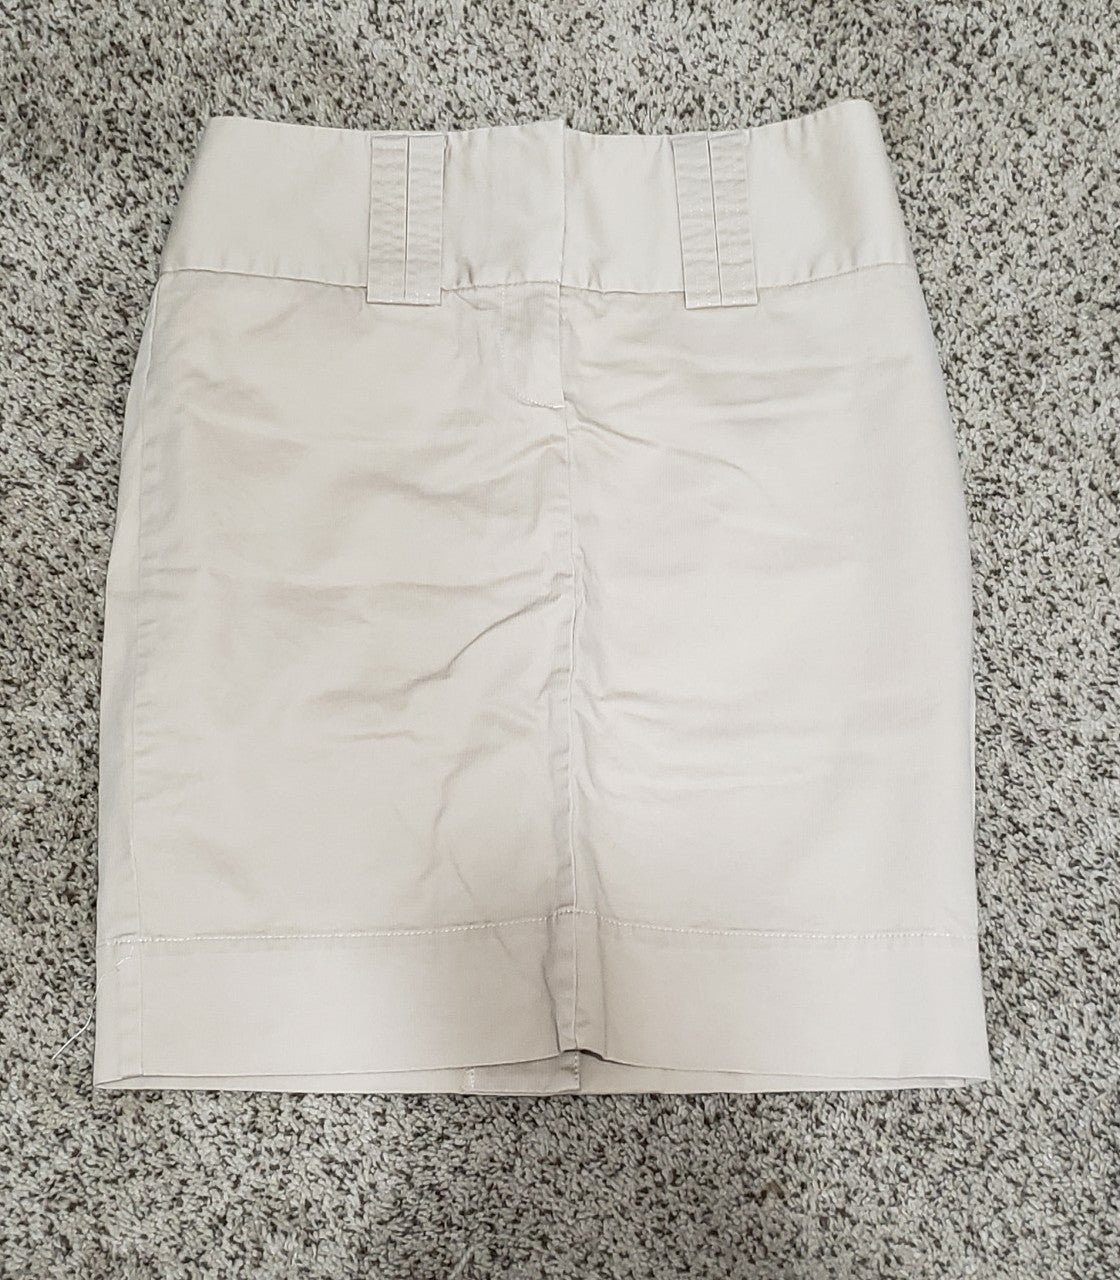 cheapest place to buy  The Limited Khaki Womens Size 4 Skirt G8Q6NOEan best sale